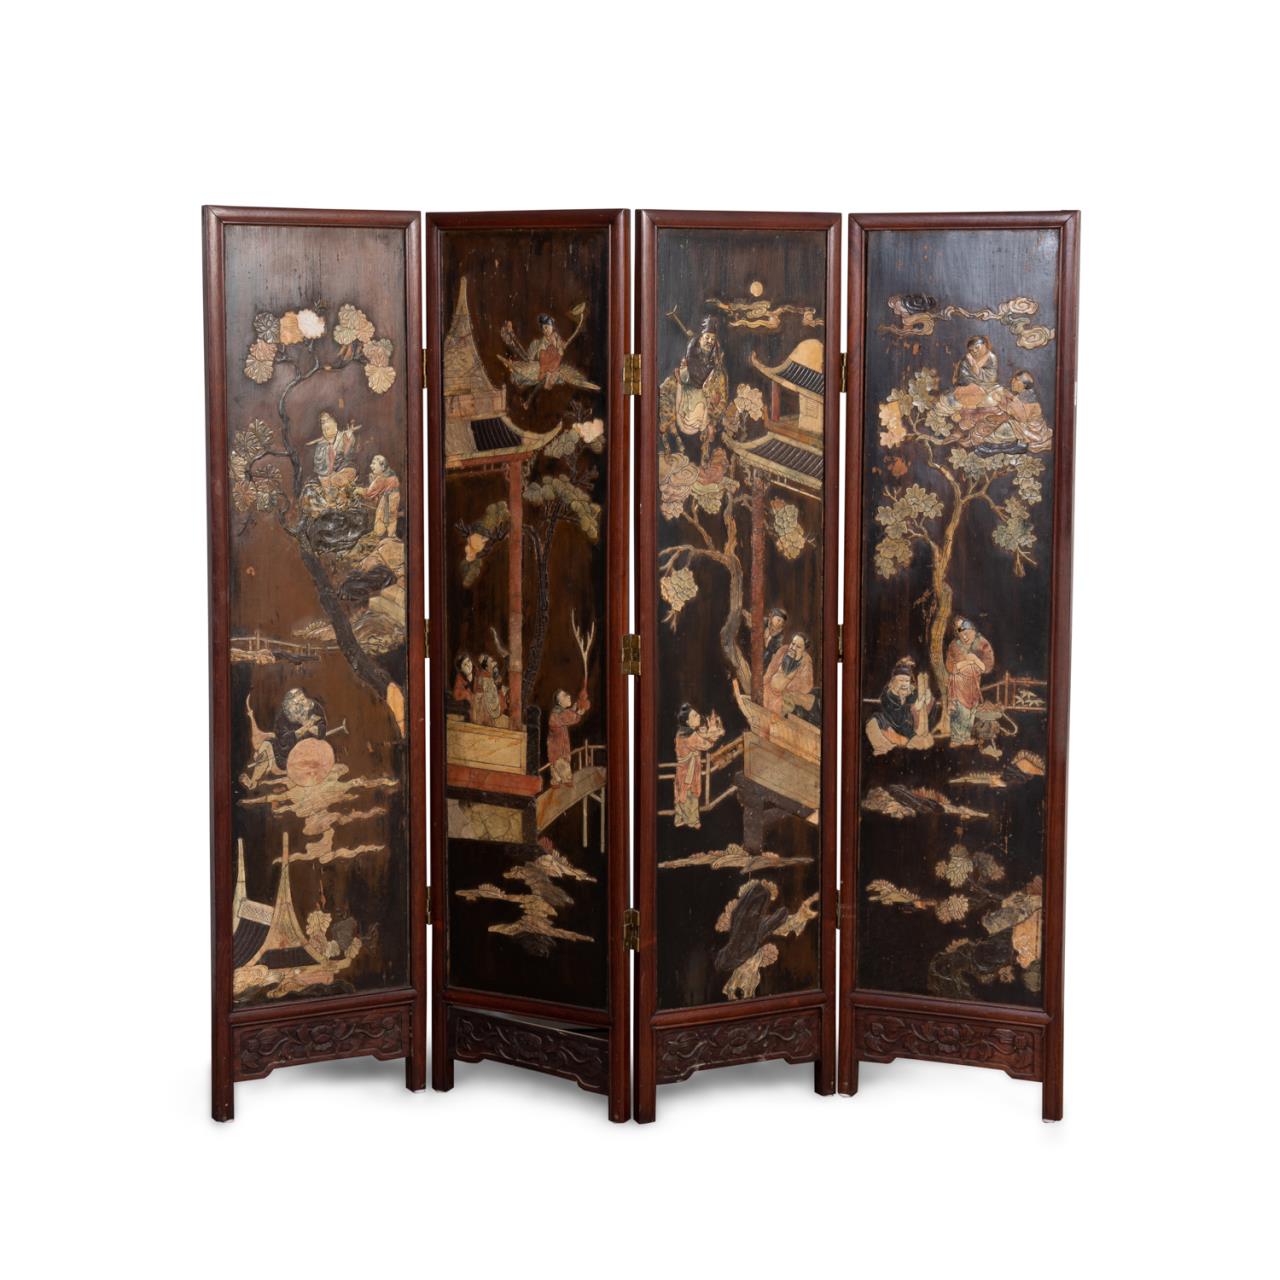 CHINESE FOUR PANEL ROSEWOOD SCREEN 358ce8